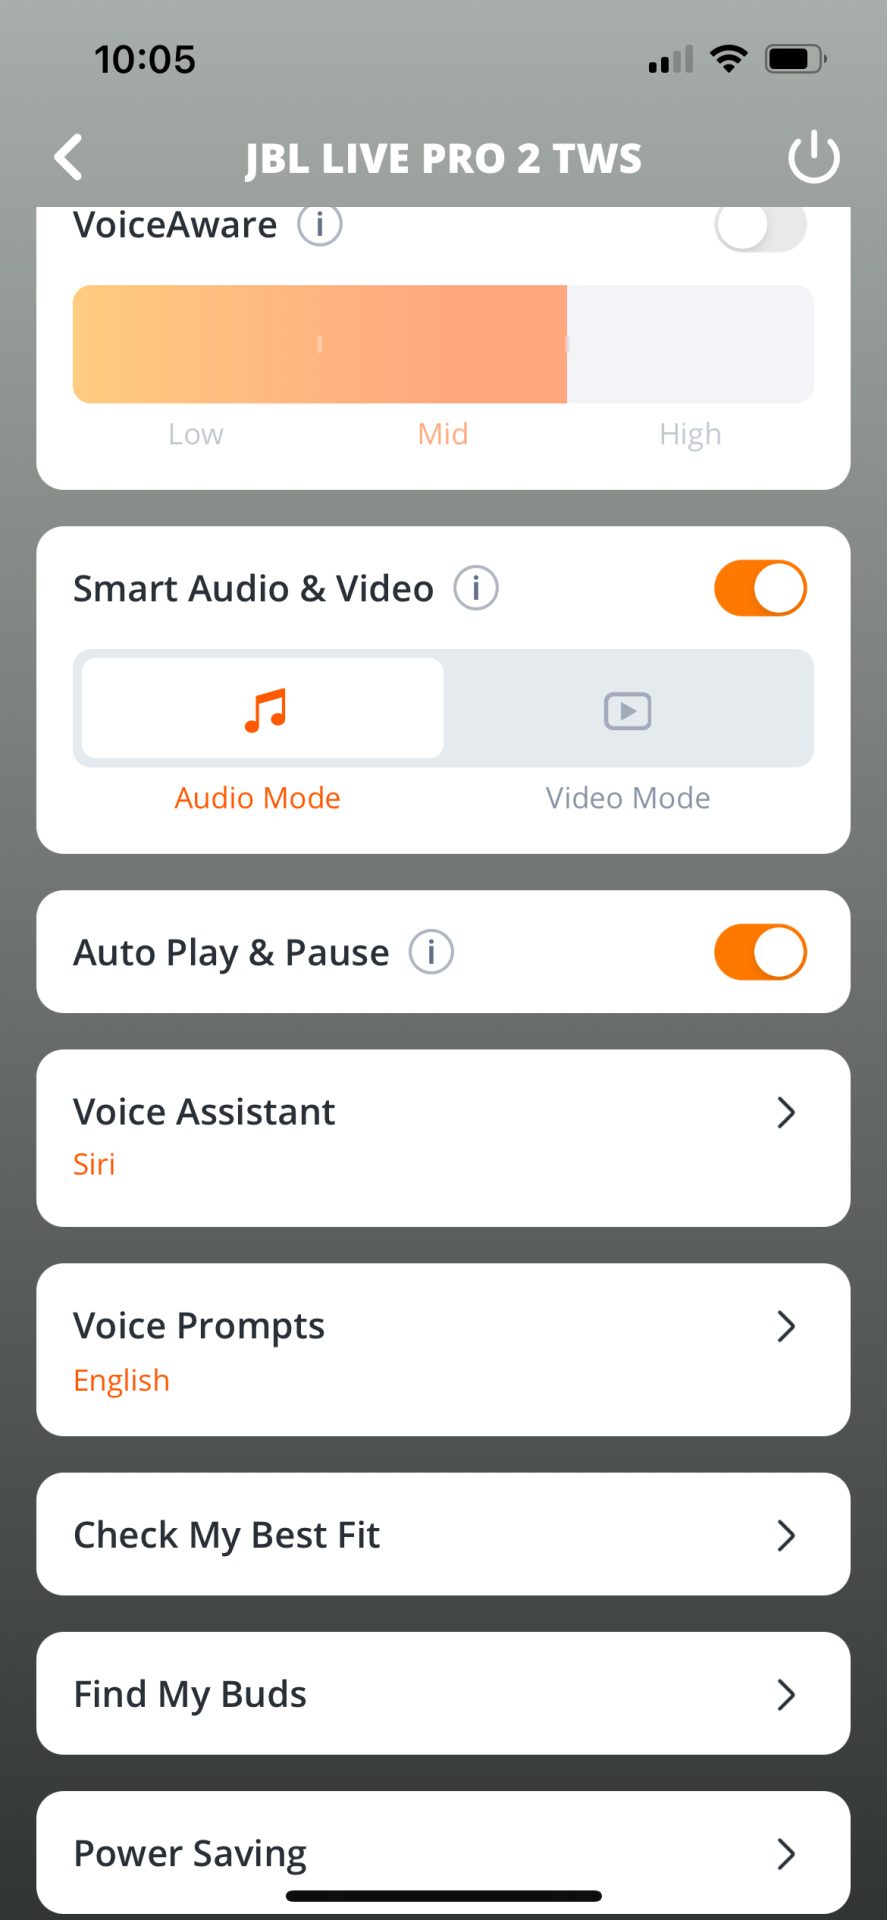 JBL Live Pro 2 other features